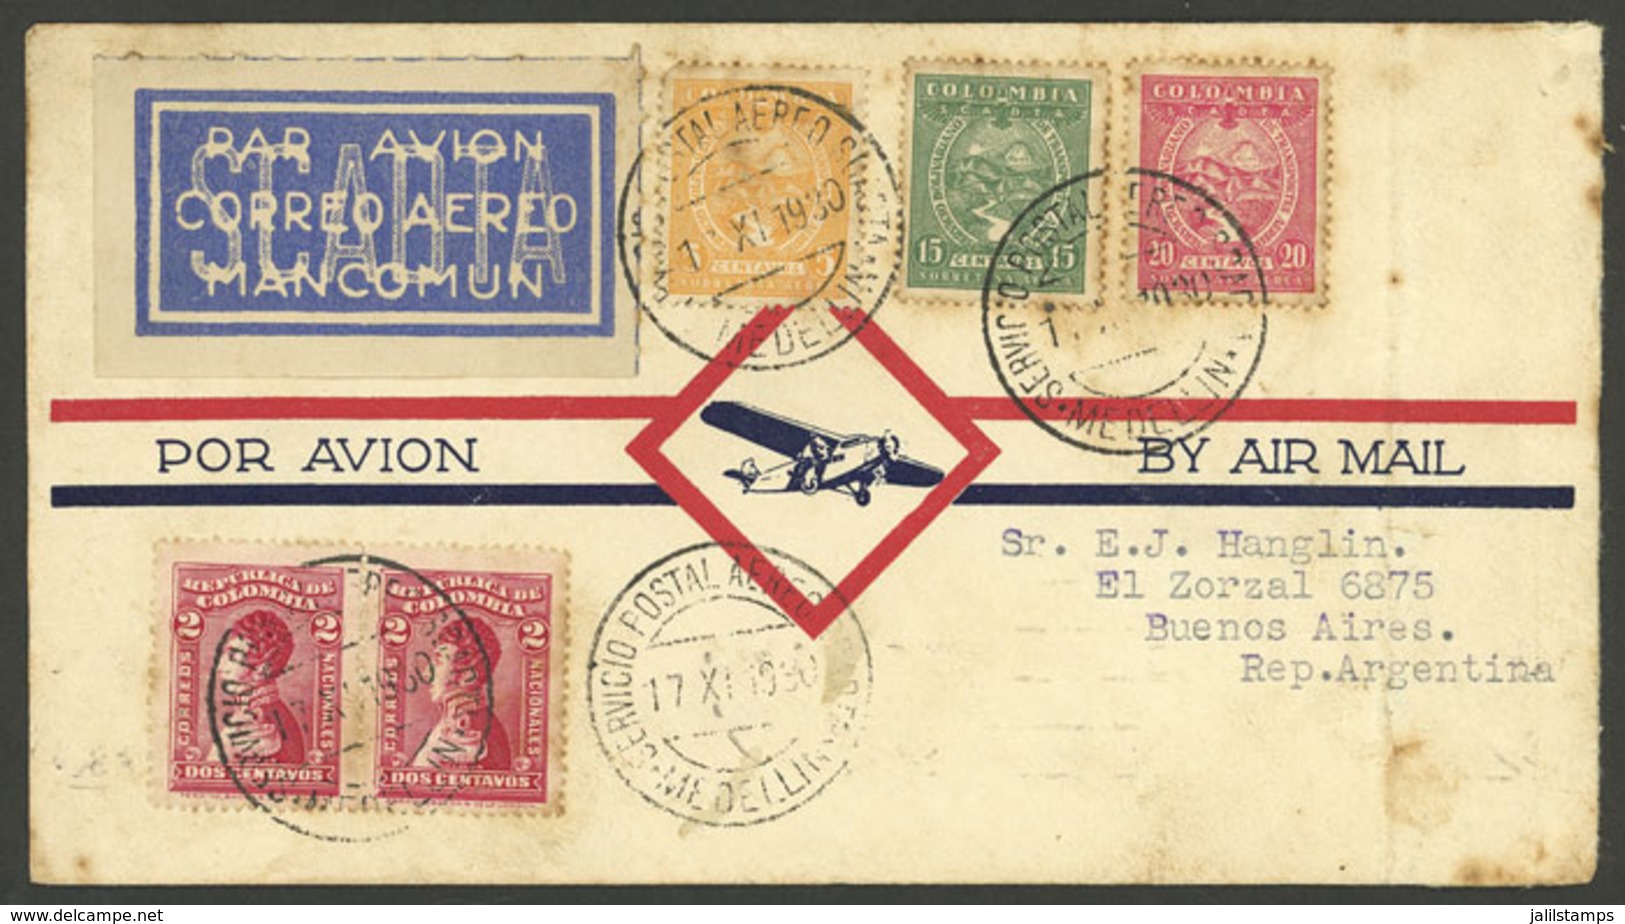 COLOMBIA: 17/NO/1930 Medellin - Argentina, Nice Airmail Cover Flown By SCADTA, Buenos Aires Arrival Backstamp Of 4/DE, I - Kolumbien